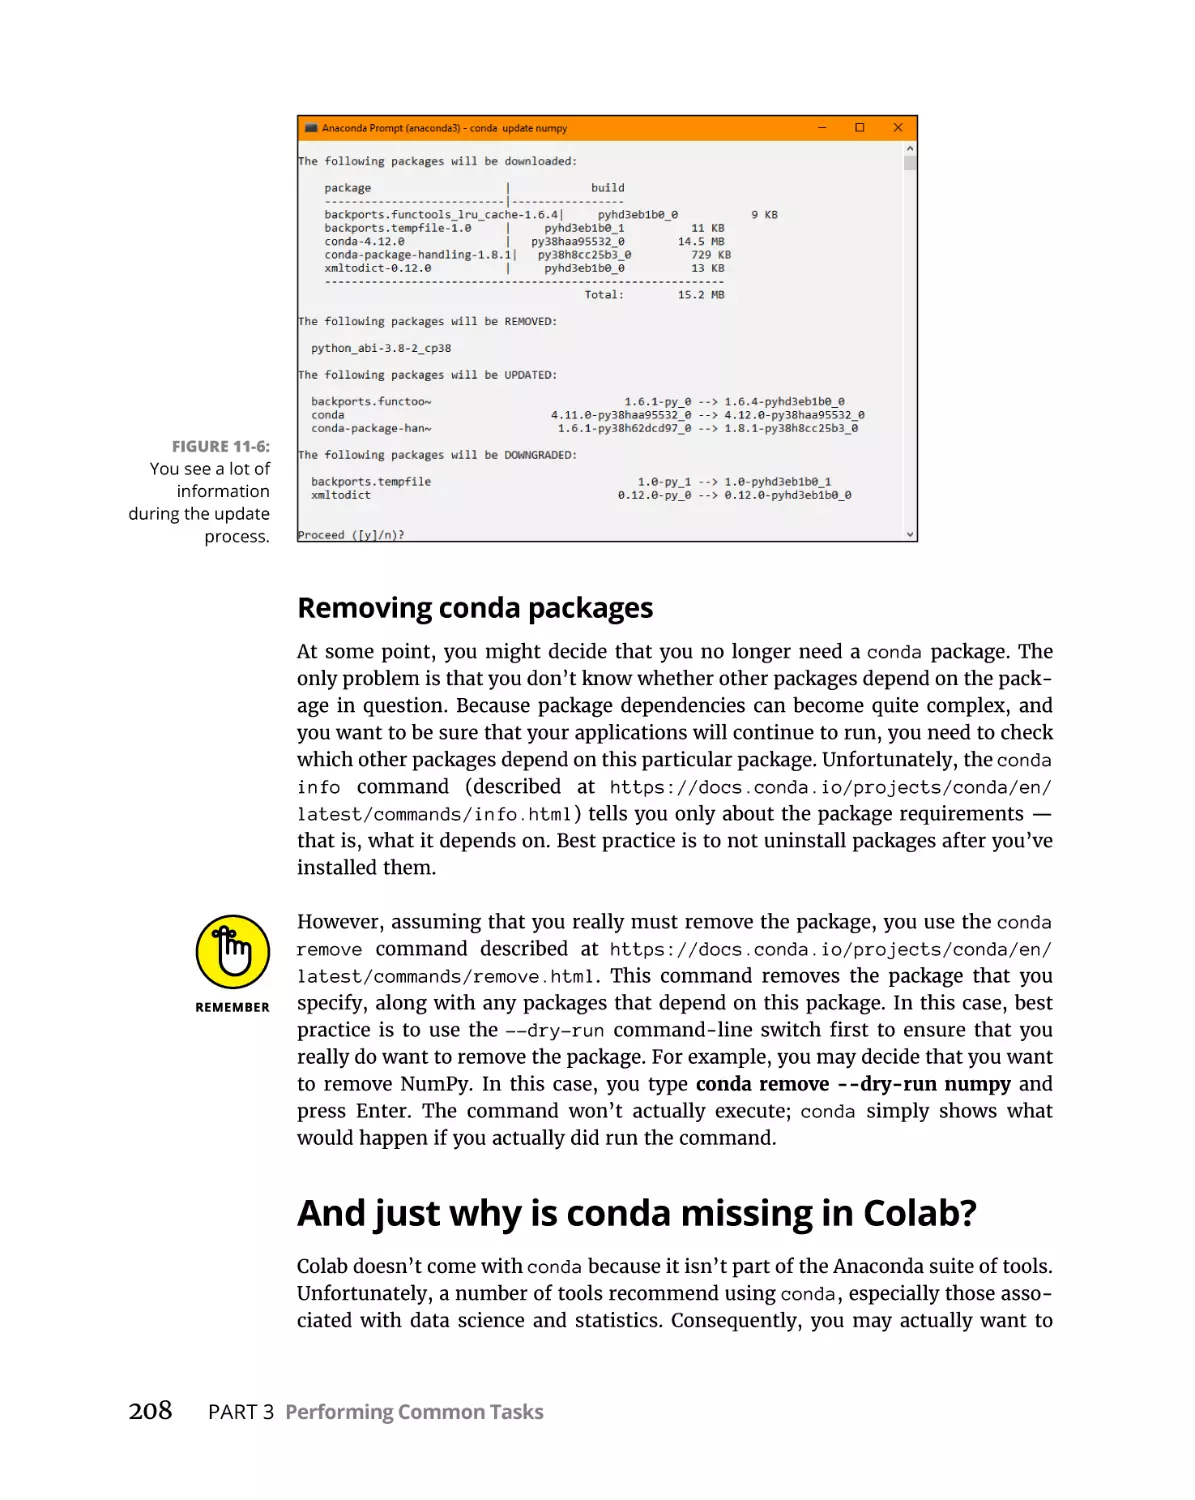 Removing conda packages
And just why is conda missing in Colab?